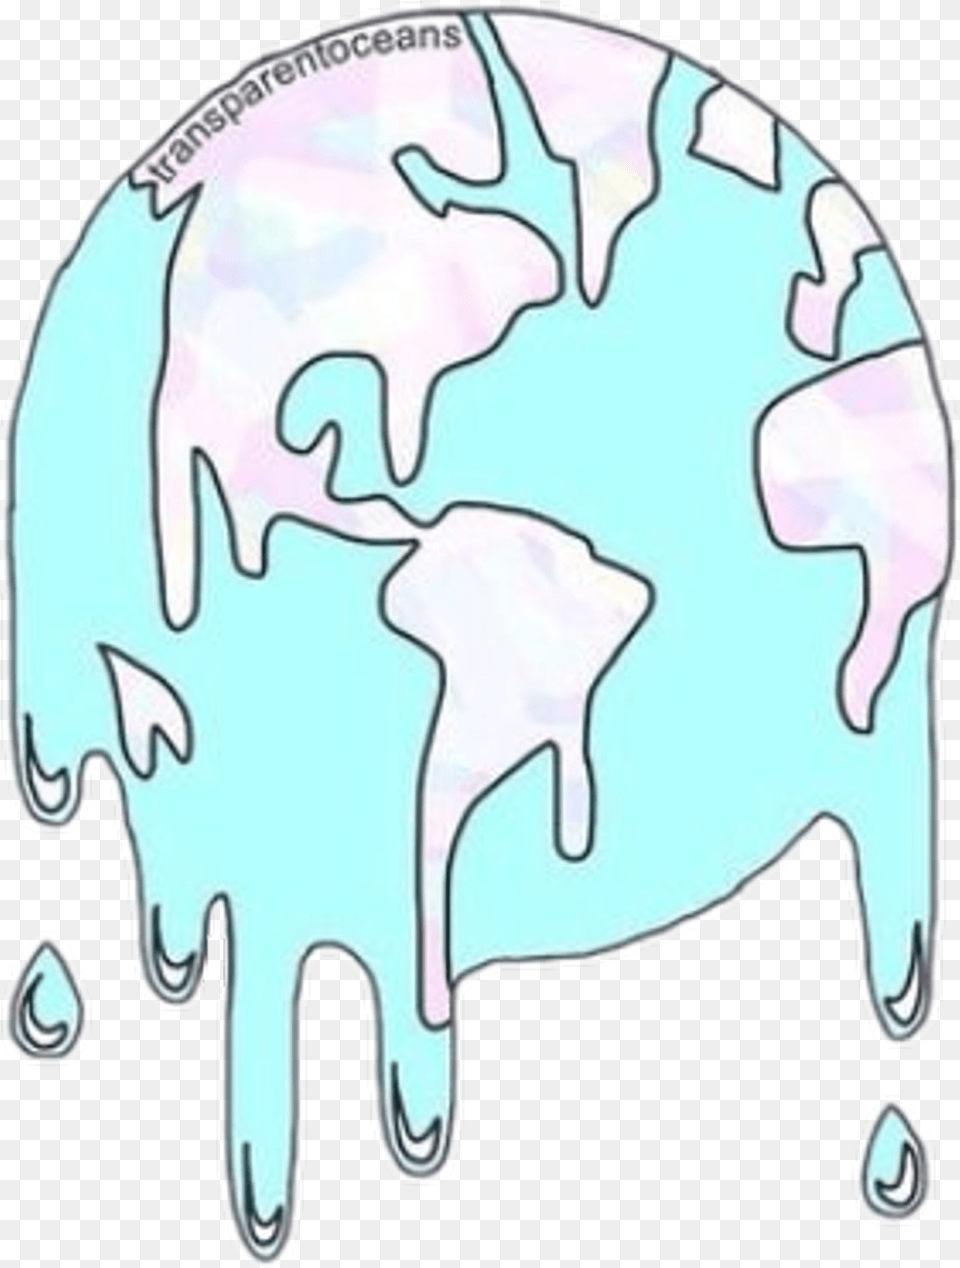 World Water Dripping Cute Tumblr Stickers For Snapchat Streaks Png